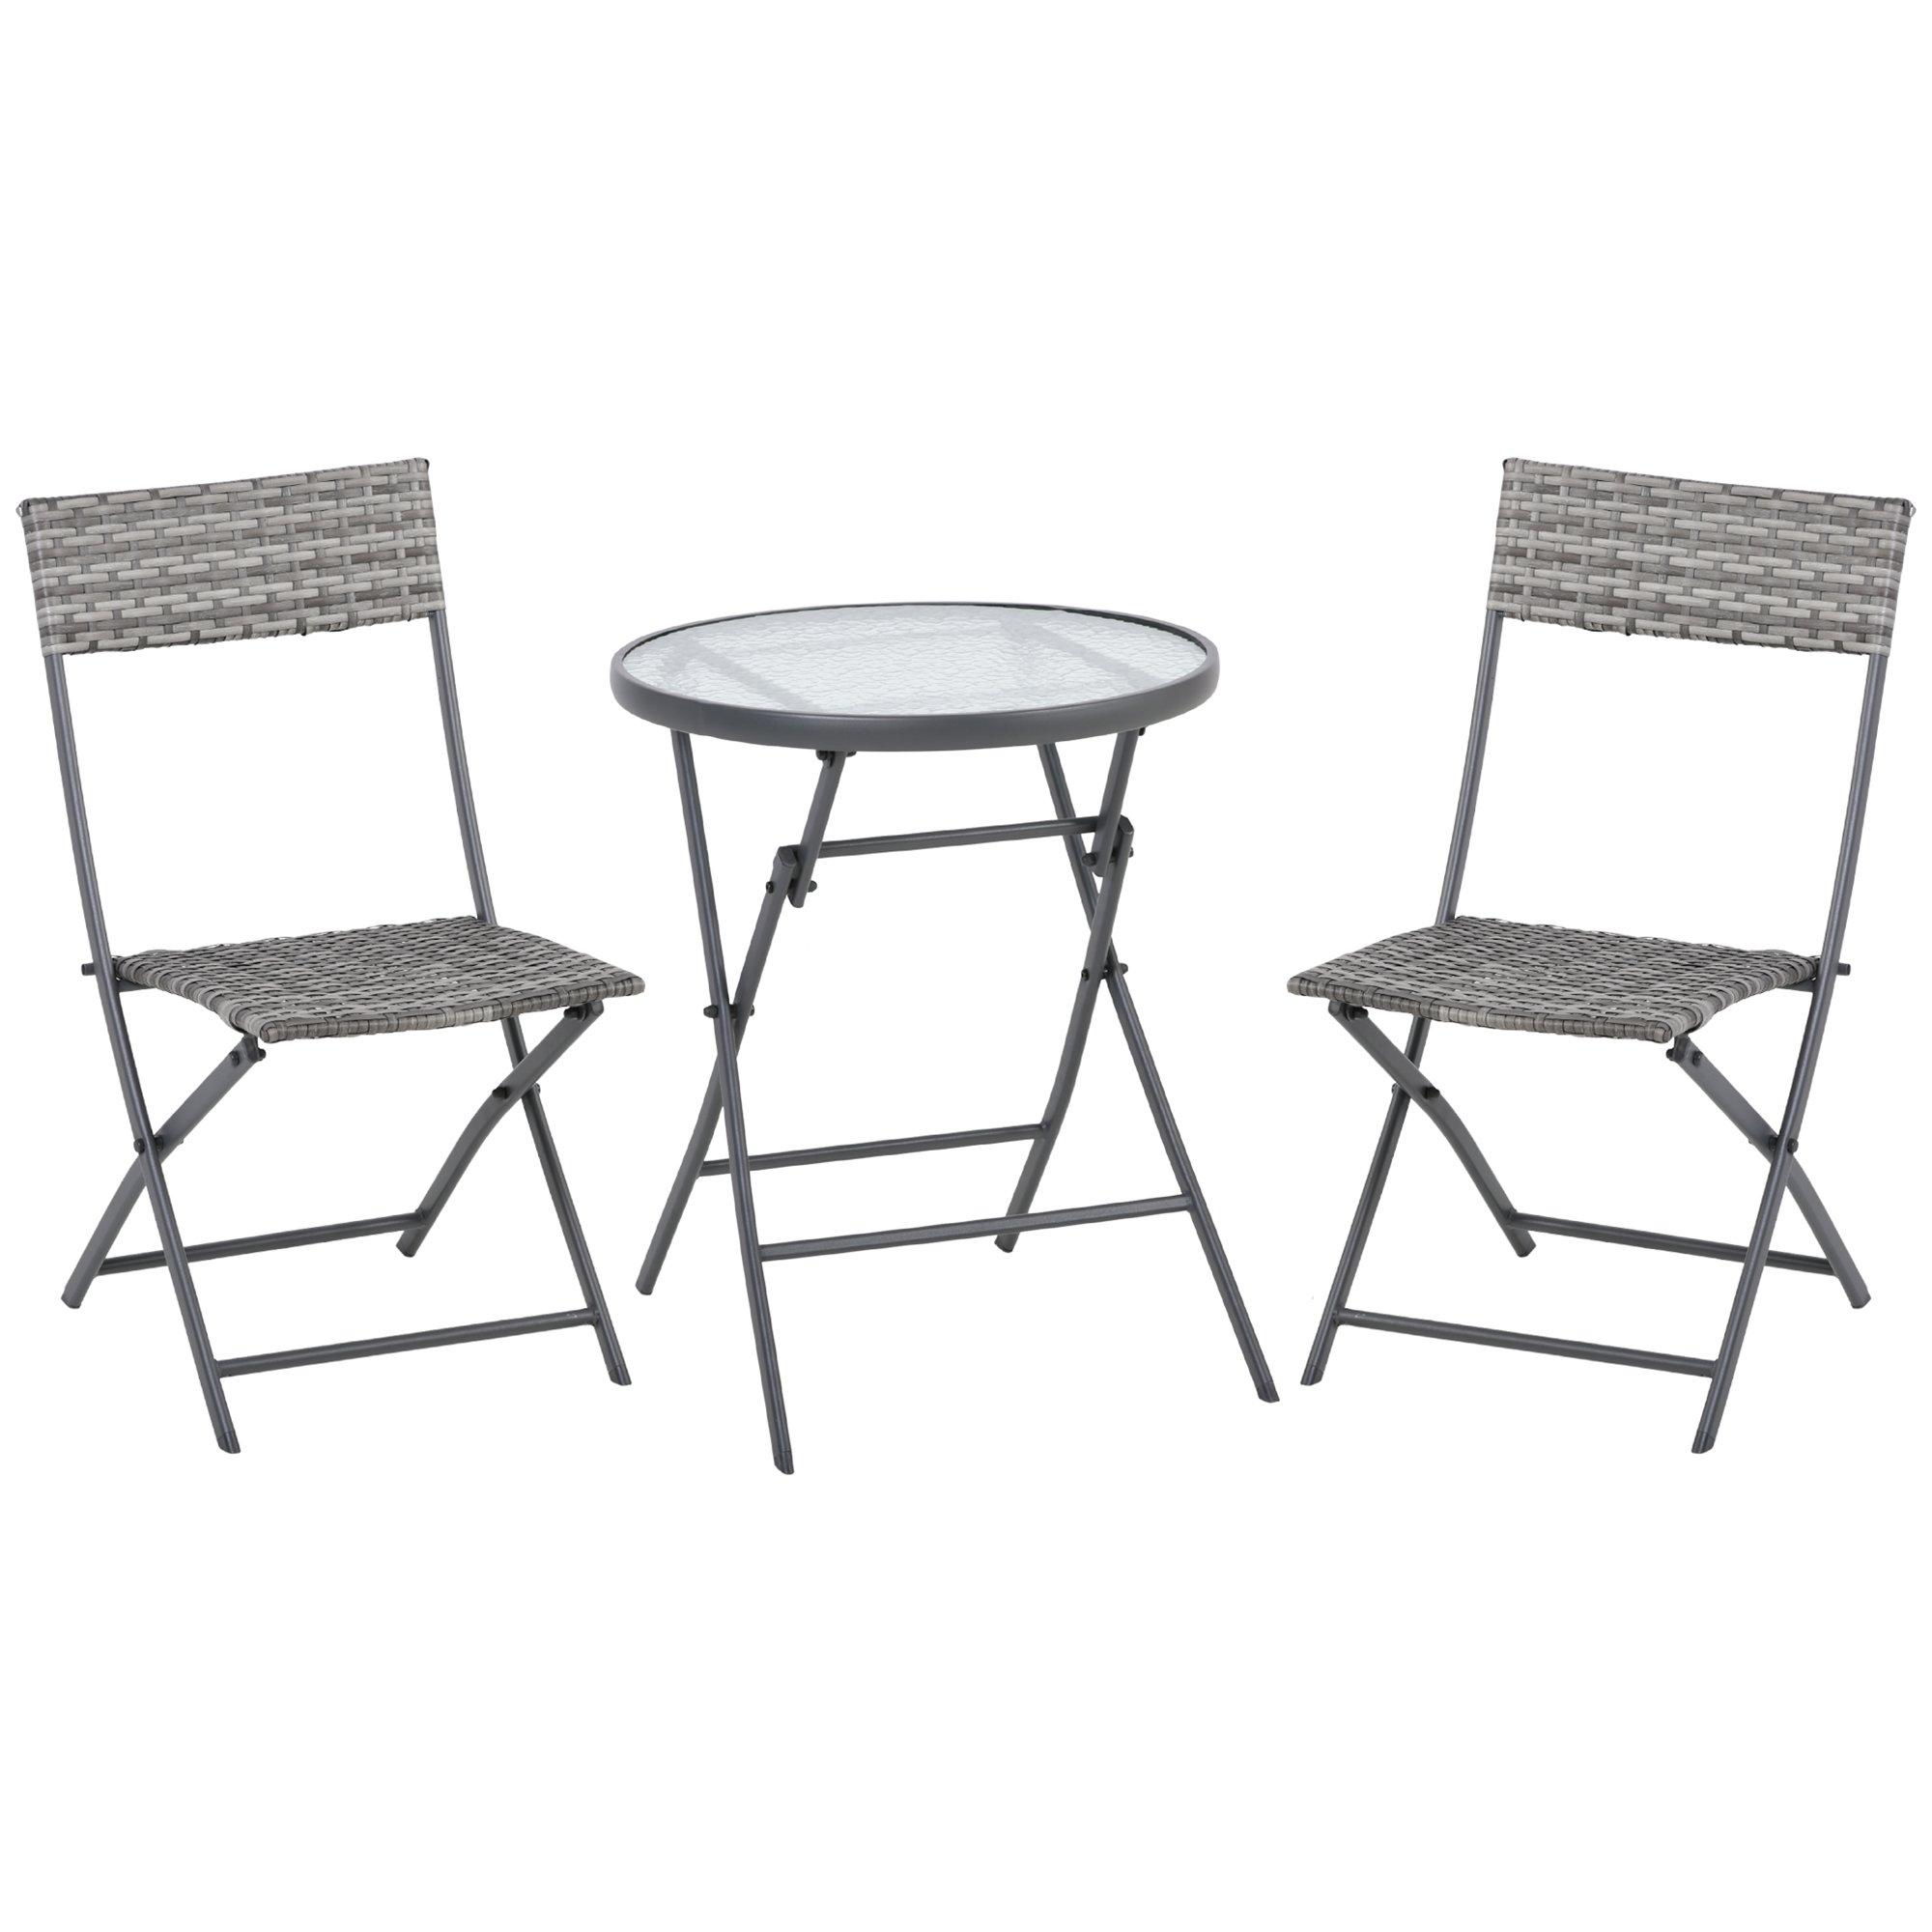 3 PCs Patio Wicker Bistro Set Foldable Table and Chair Set for Outdoor Yard